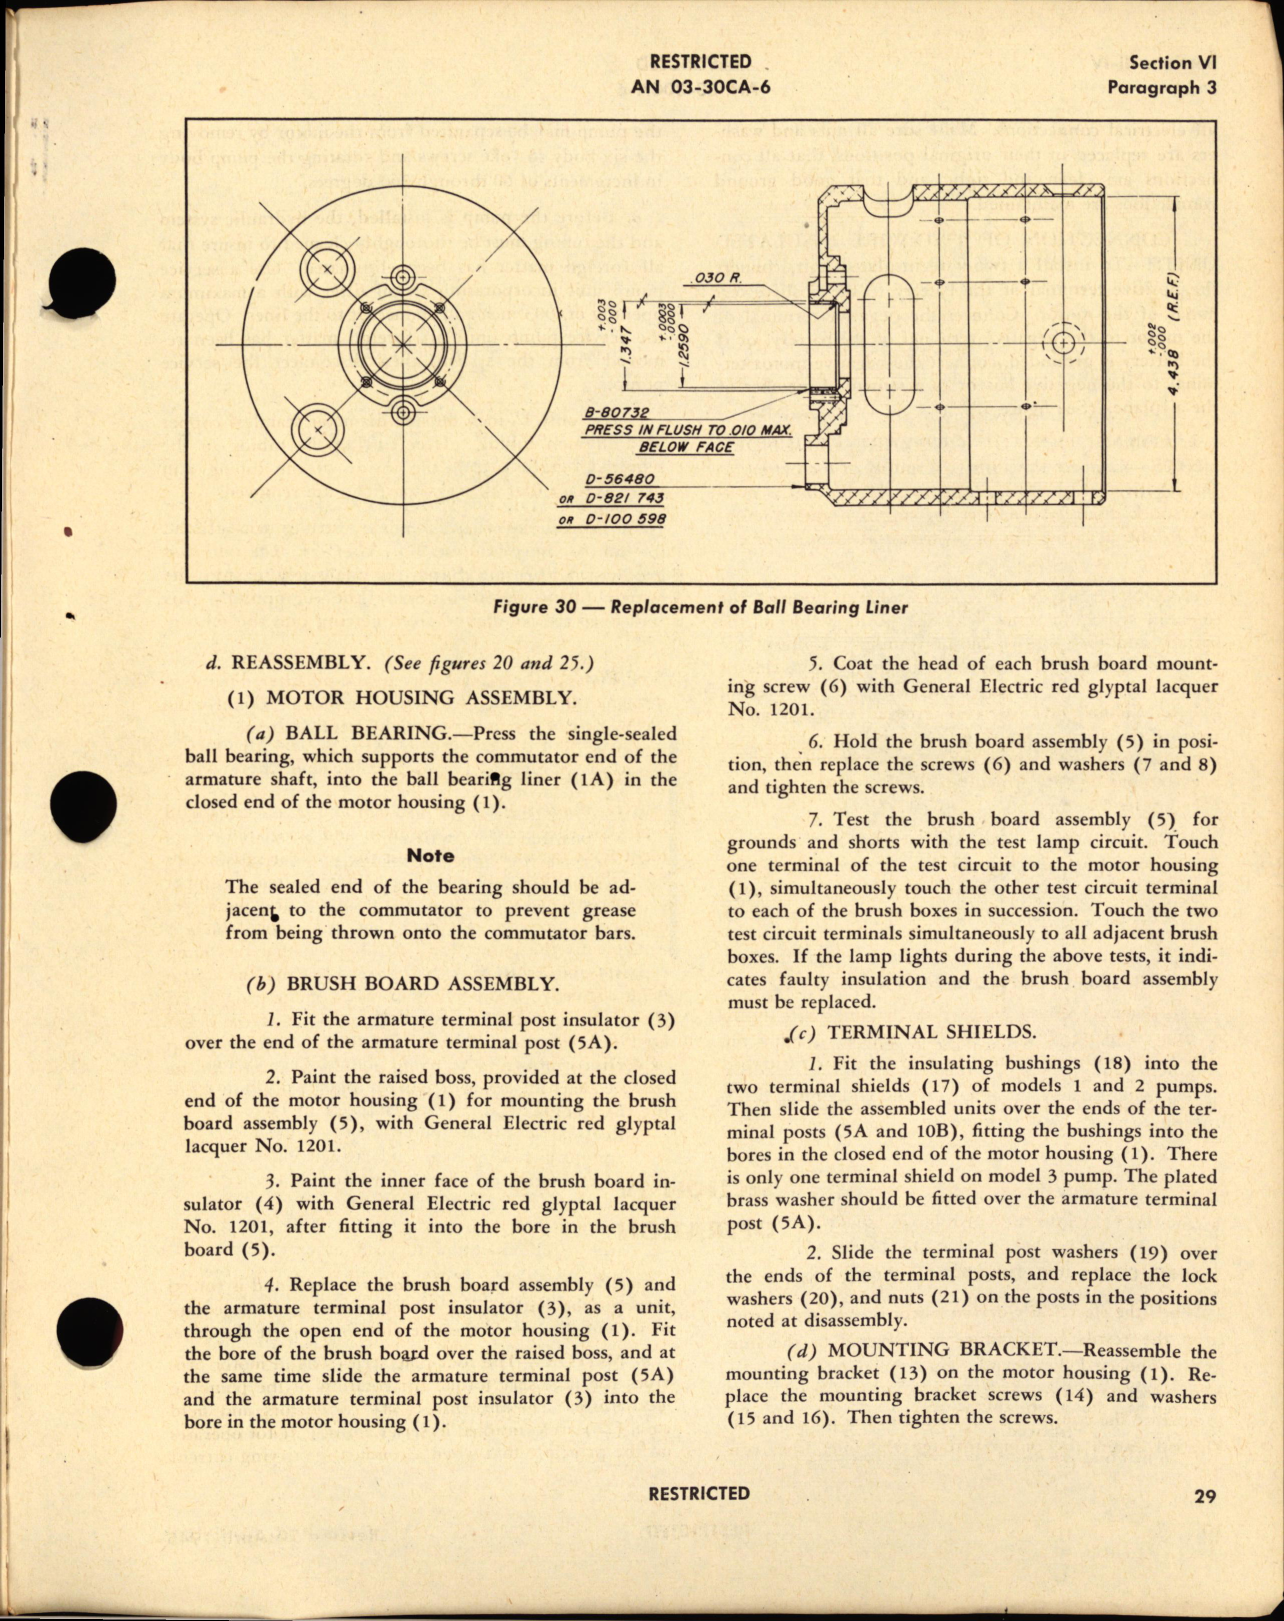 Sample page 7 from AirCorps Library document: Handbook of Instructions with Parts Catalog for Eclipse Type Gerotor Pumps